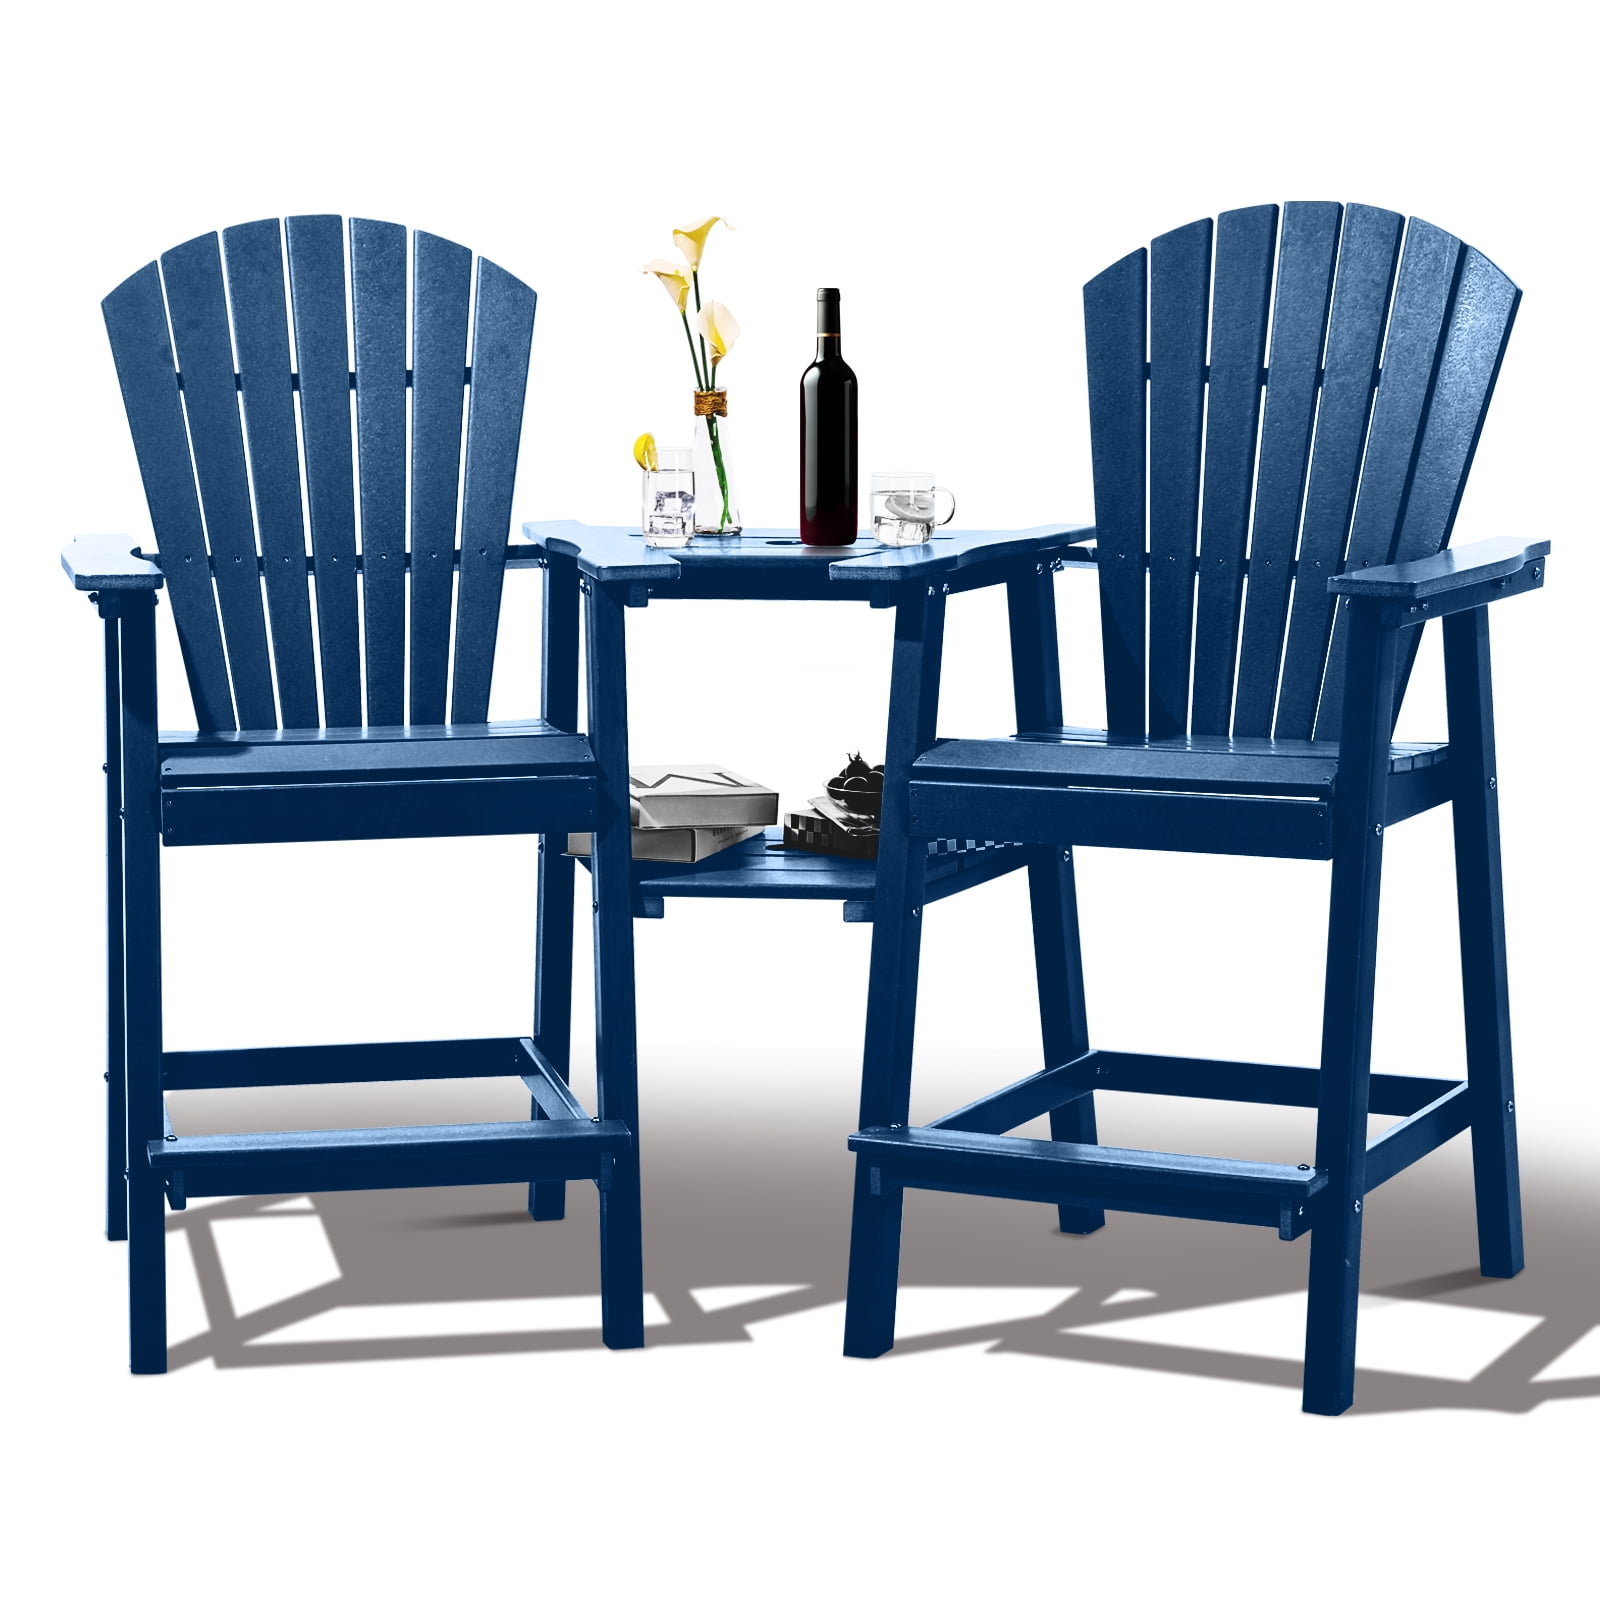 Tall Adirondack Chairs Set of 2，Outdoor Adirondack Barstools with Double Connecting Tray Patio Stools Weather Resistant for Outdoor Deck Lawn Pool Backyard,Navy Blue - image 1 of 7